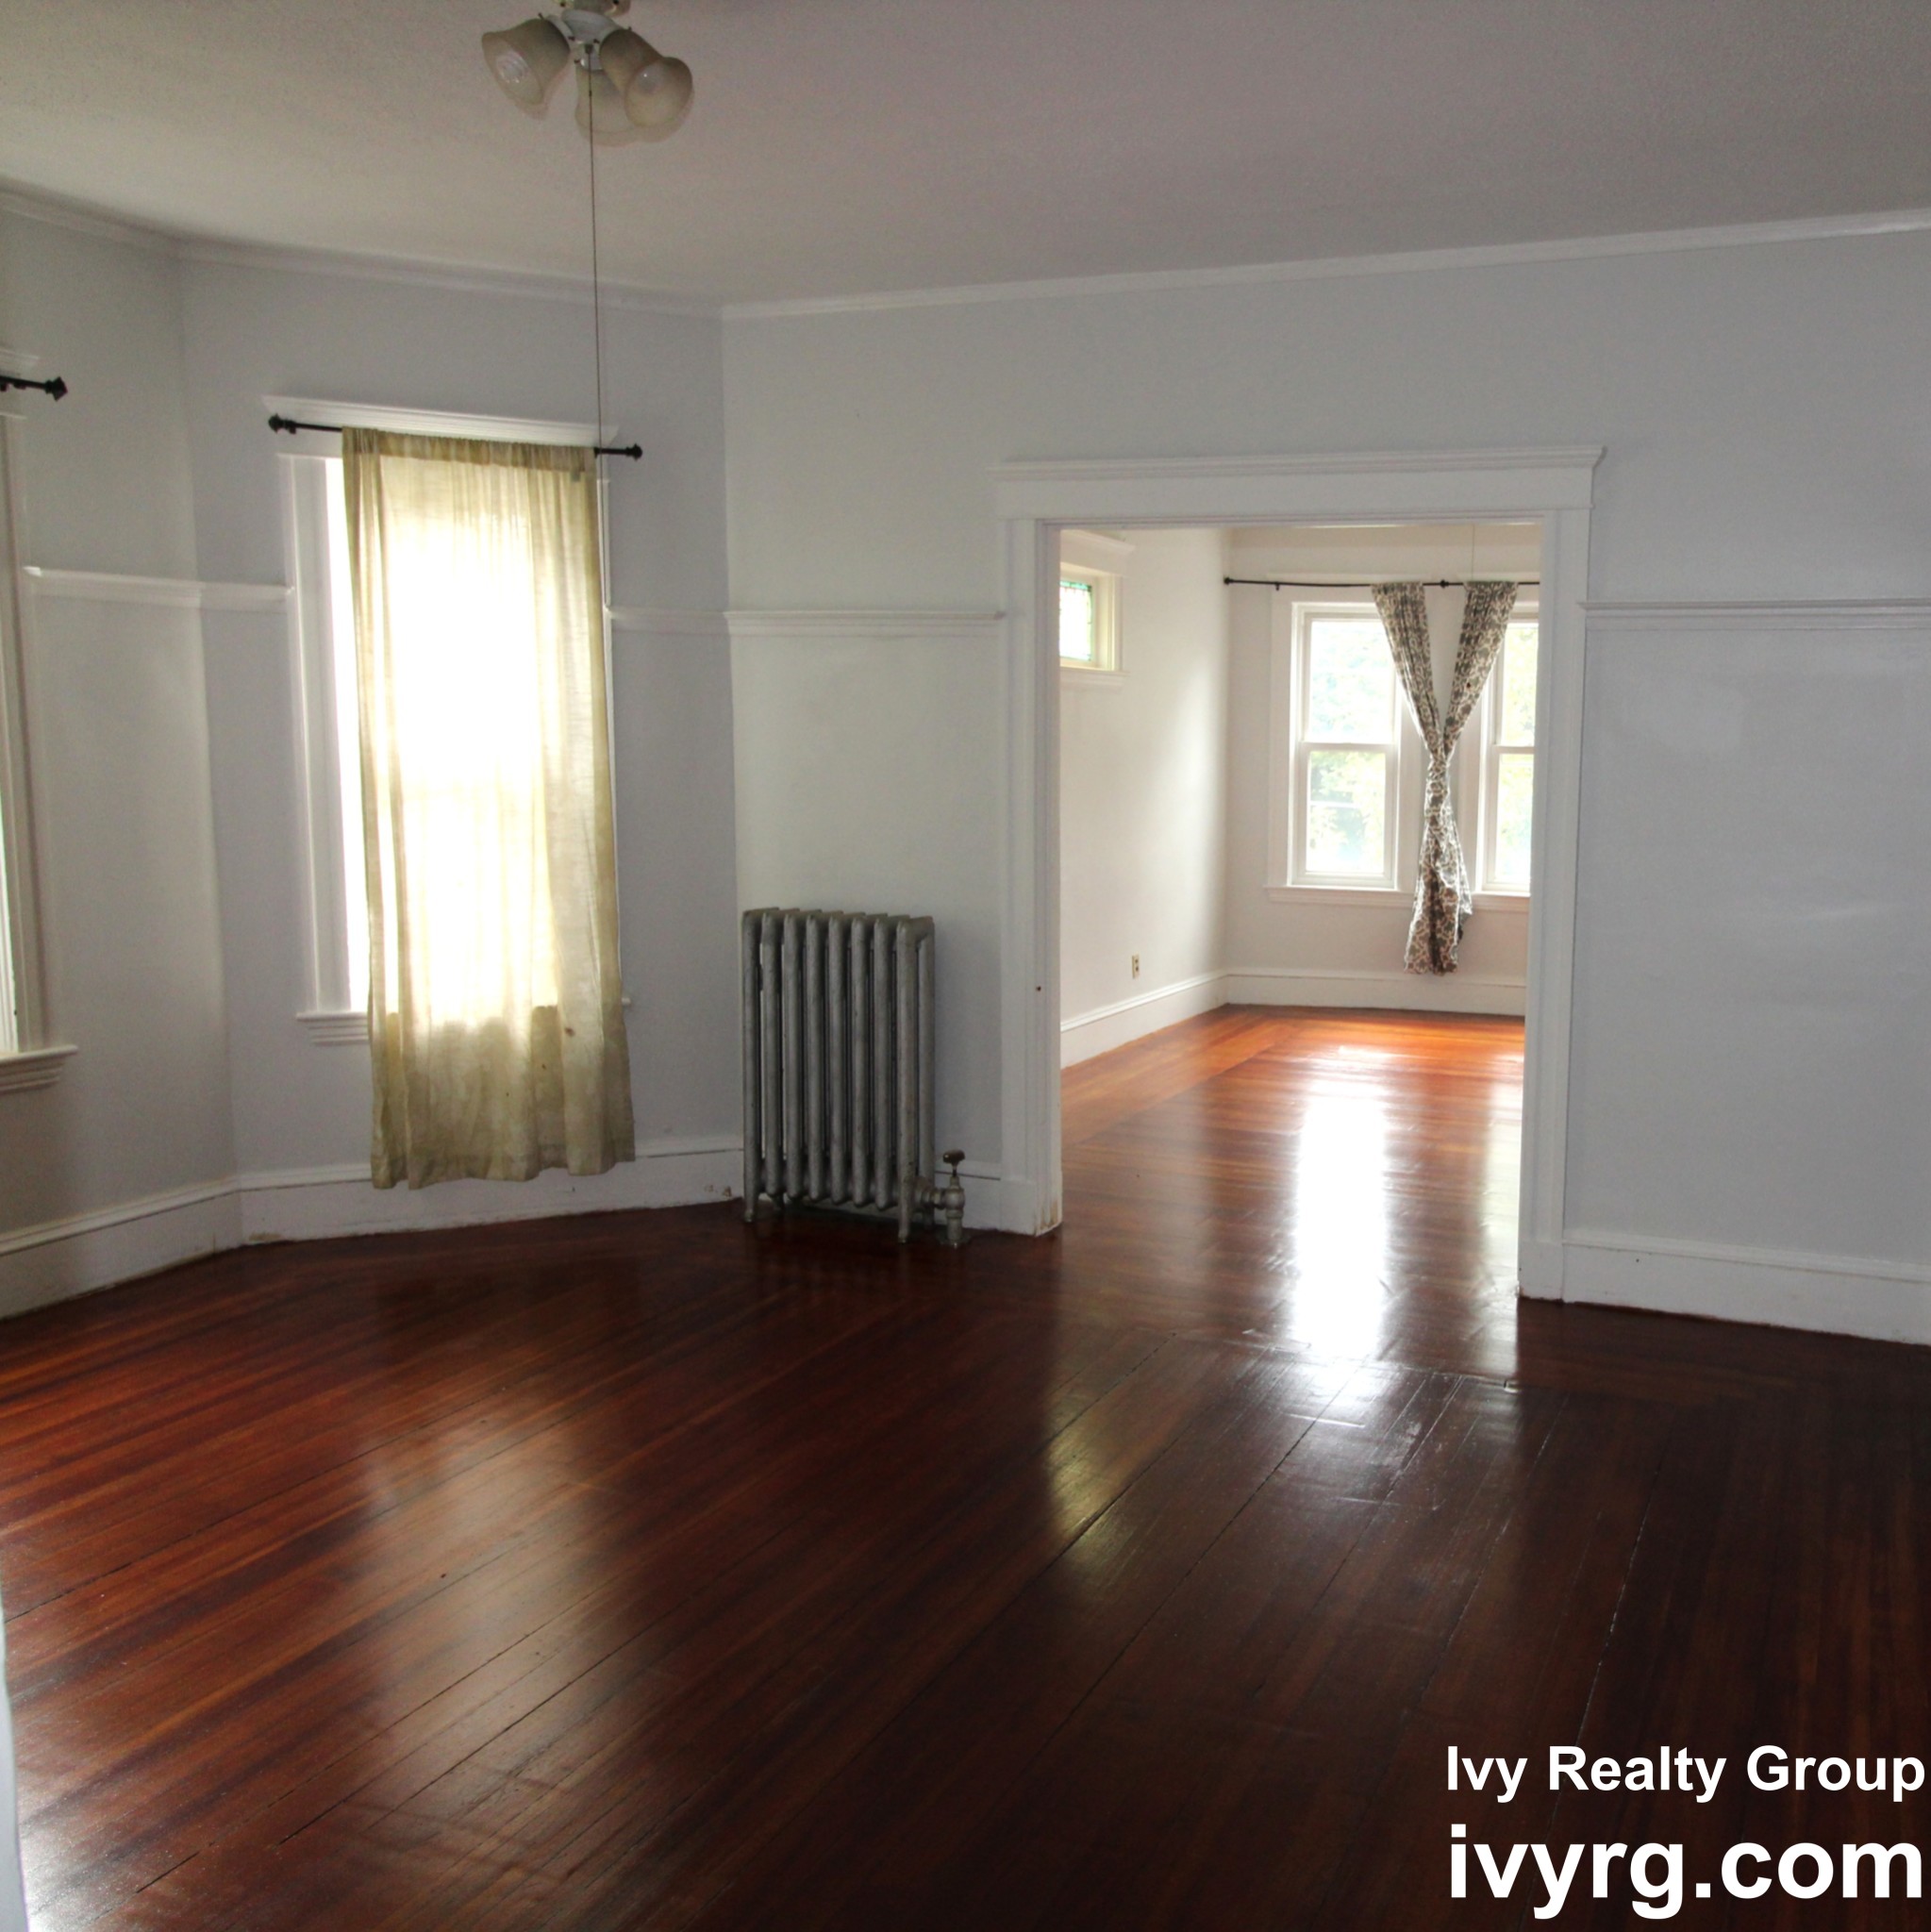 Photos of apartment on College Ave.,Somerville MA 02144